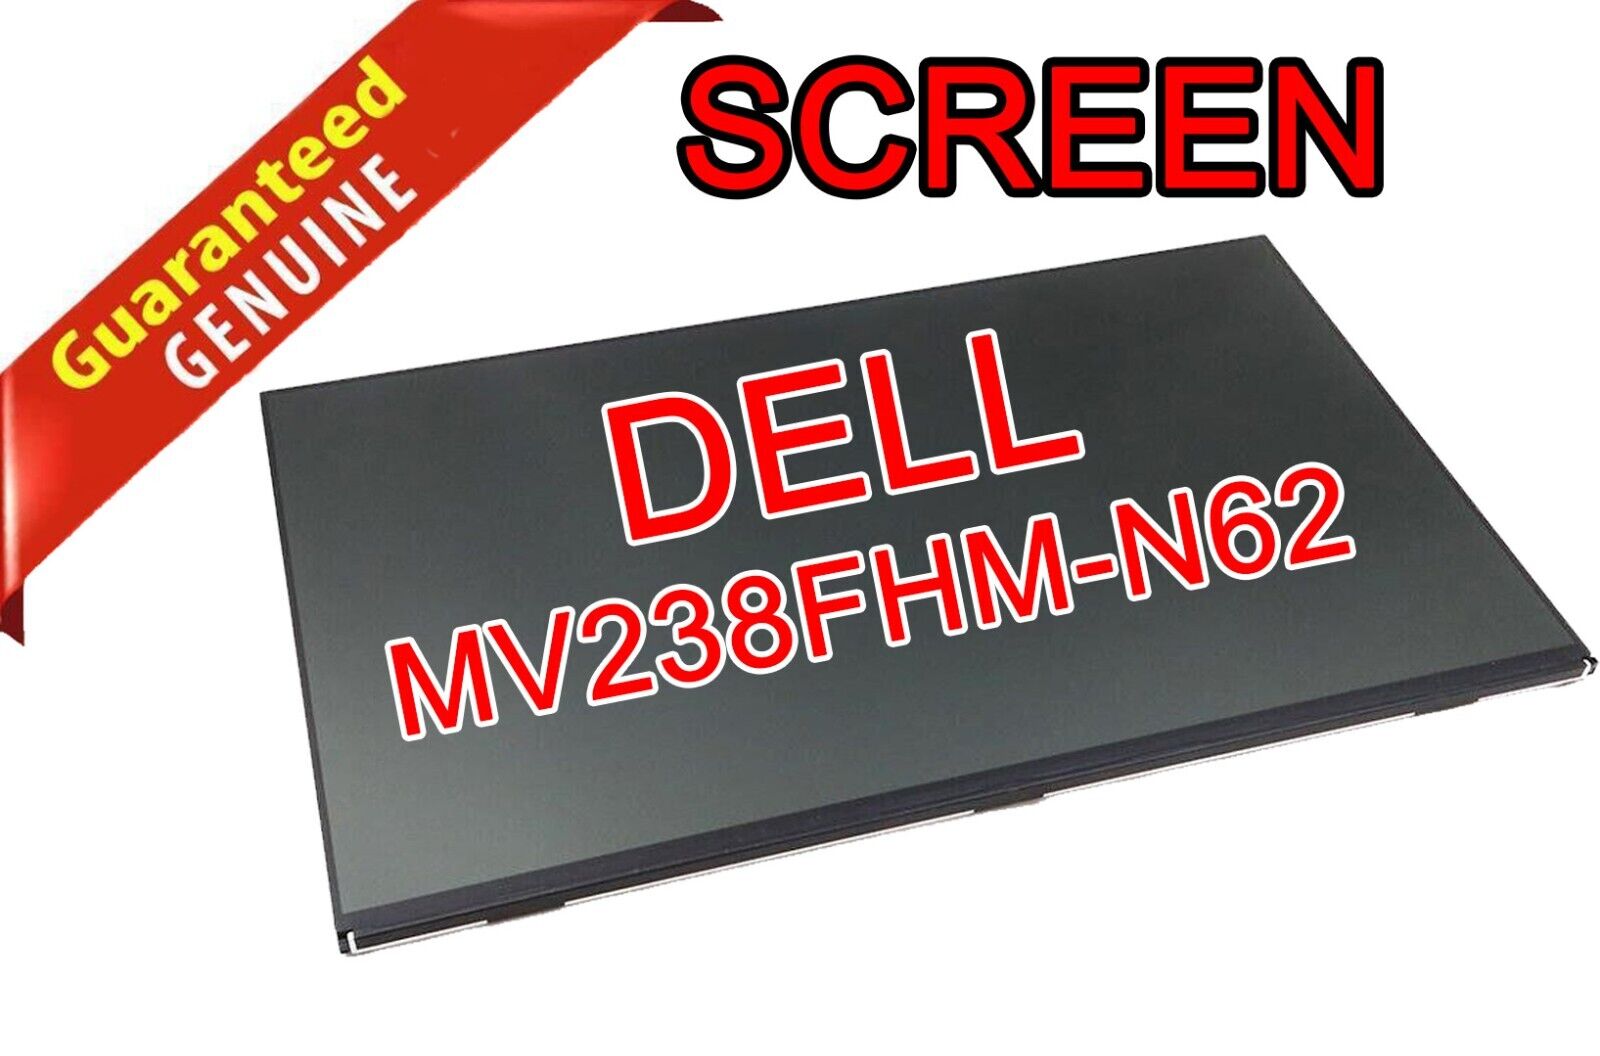 For Dell OptiPlEX 0H3W3J MV238FHM-N62 FHD LCD LED Non-Touch Screen Display  *